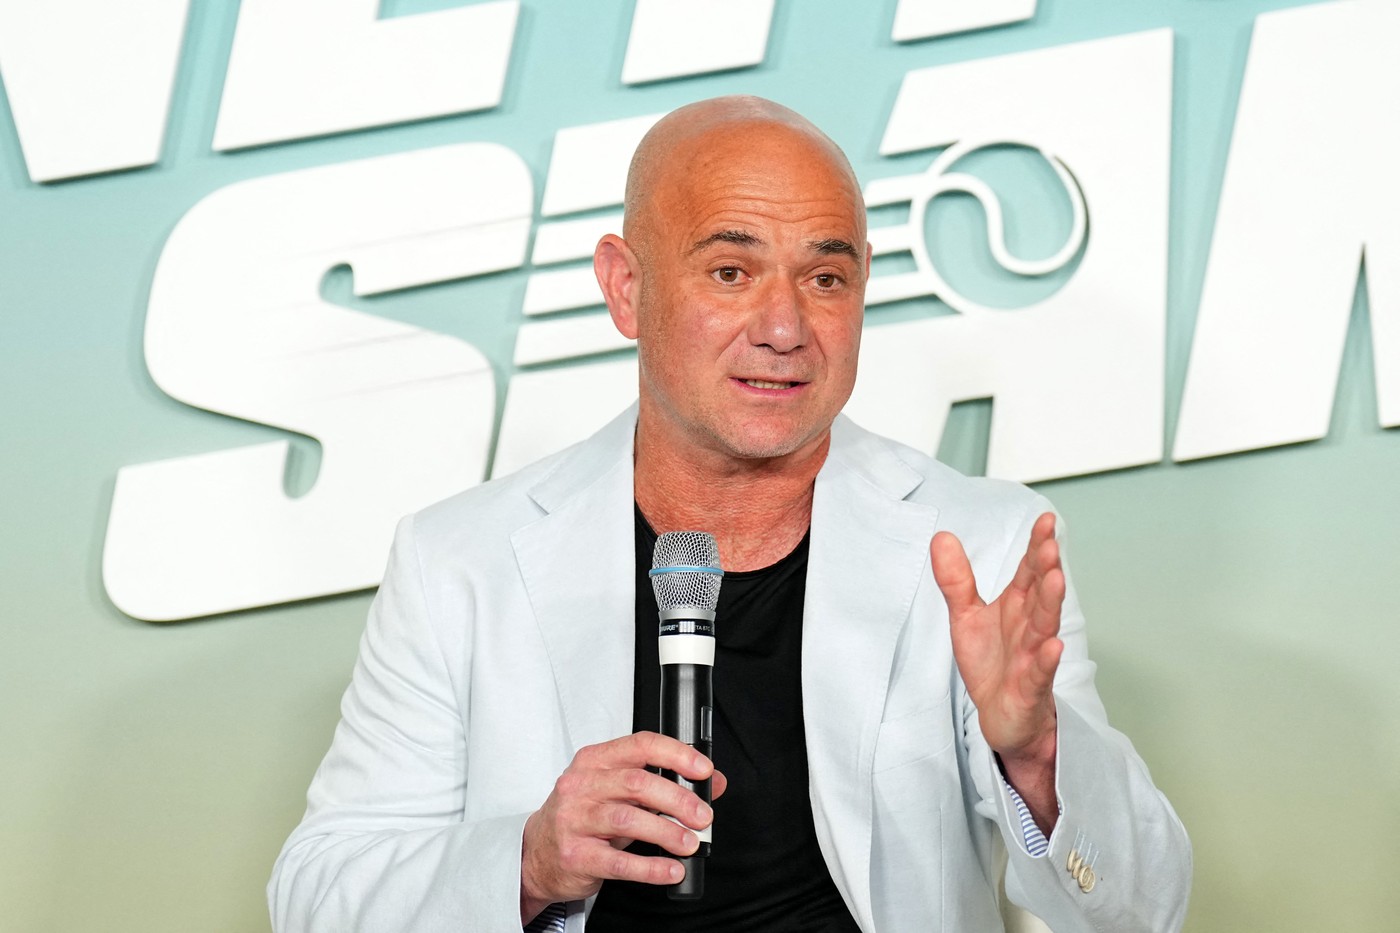 LAS VEGAS, NEVADA - MARCH 02: Andre Agassi speaks onstage during The Netflix Slam media availability event at Mandalay Bay Resort and Casino on March 02, 2024 in Las Vegas, Nevada.   Chris Unger,Image: 853143114, License: Rights-managed, Restrictions: , Model Release: no